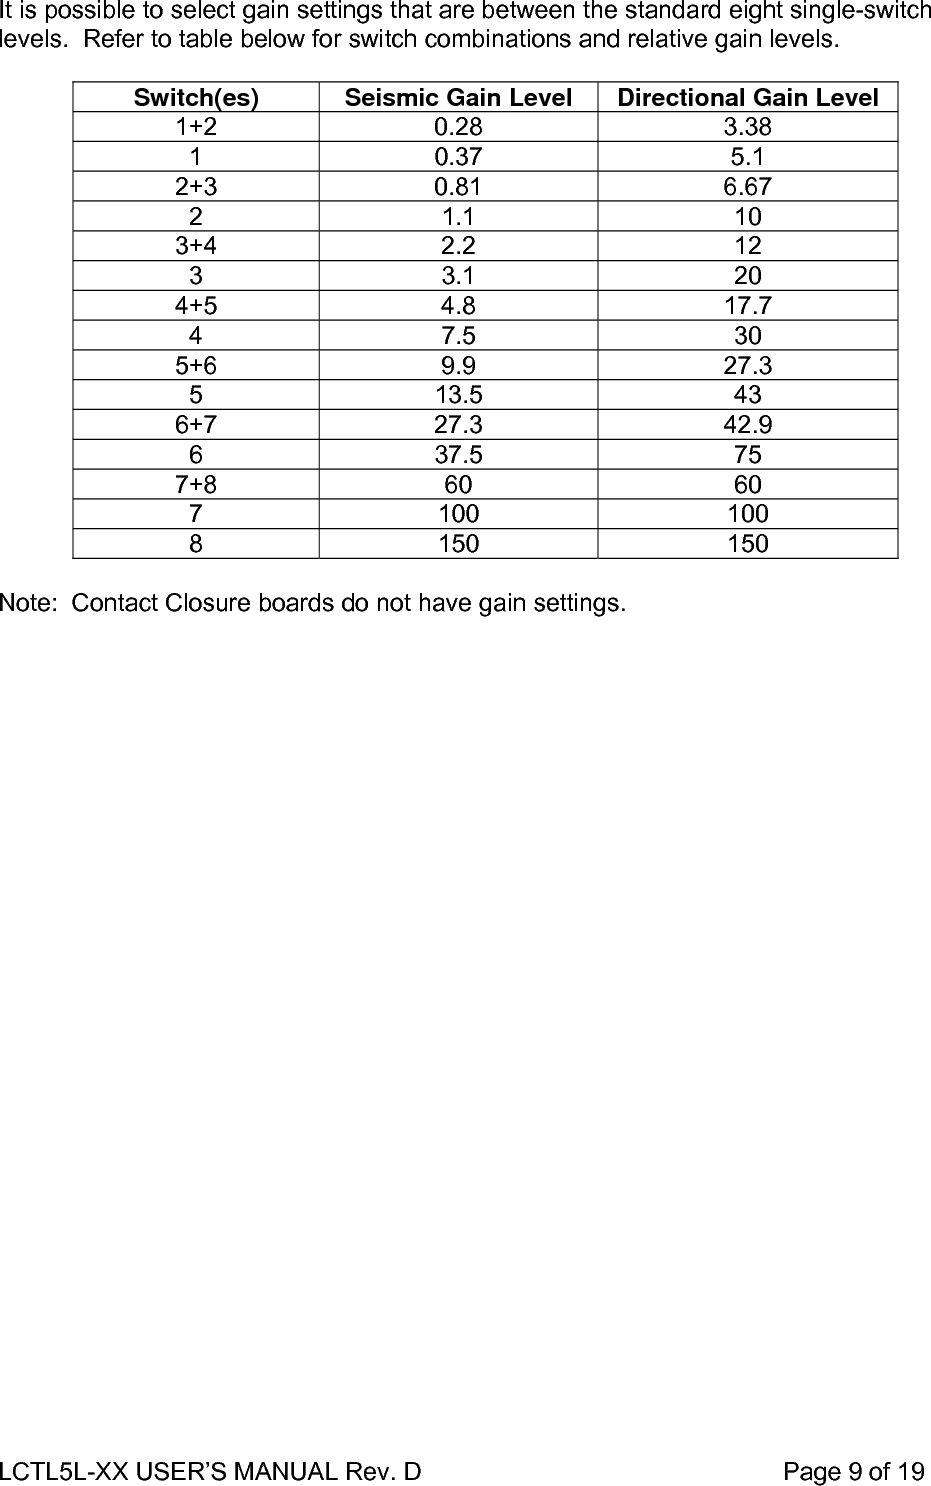 LCTL5L-XX USER’S MANUAL Rev. D                                                    Page 9 of 19  It is possible to select gain settings that are between the standard eight single-switch levels.  Refer to table below for switch combinations and relative gain levels.  Switch(es)  Seismic Gain Level  Directional Gain Level 1+2 0.28  3.38 1 0.37  5.1 2+3 0.81  6.67 2 1.1  10 3+4 2.2  12 3 3.1  20 4+5 4.8  17.7 4 7.5  30 5+6 9.9  27.3 5 13.5  43 6+7 27.3  42.9 6 37.5  75 7+8 60  60 7 100  100 8 150  150  Note:  Contact Closure boards do not have gain settings. 